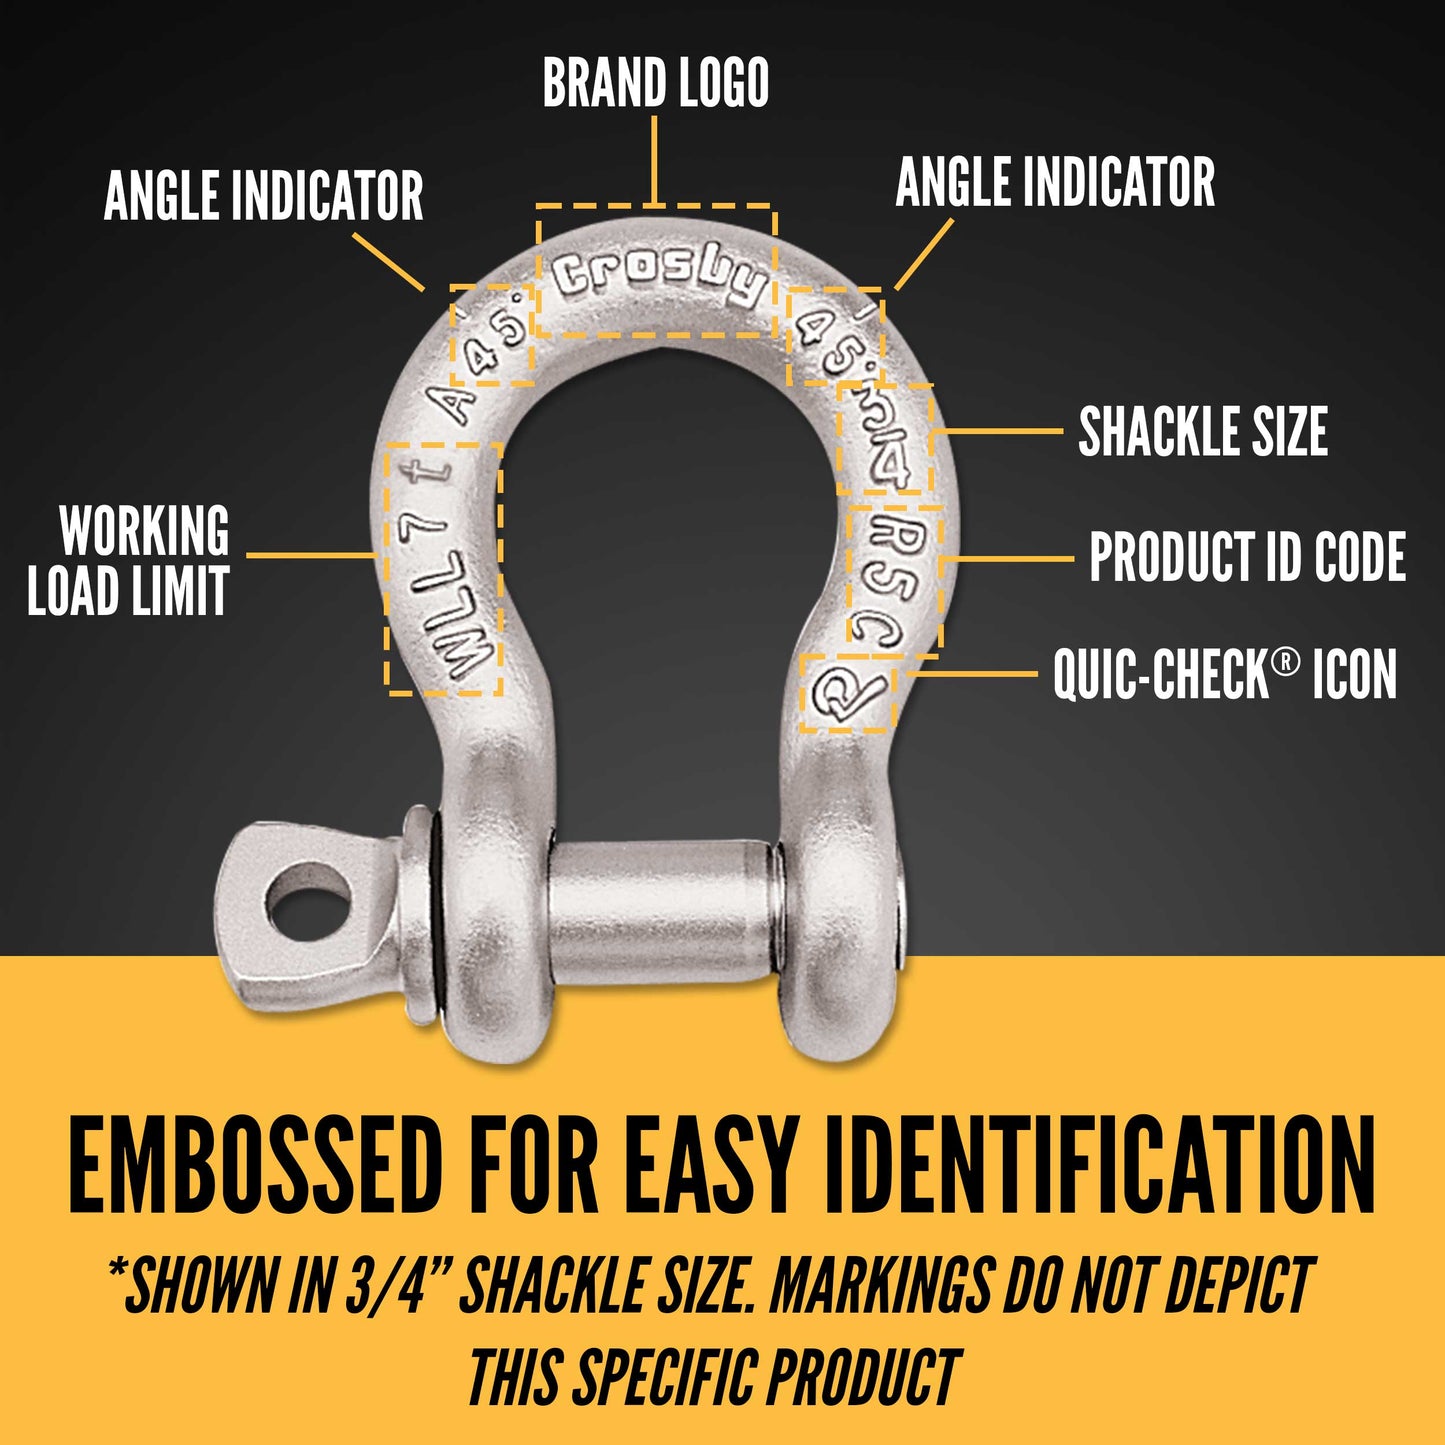 3/8" Crosby® Alloy Screw Pin Anchor Shackle | G-209A - 2 Ton embossed for easy identification